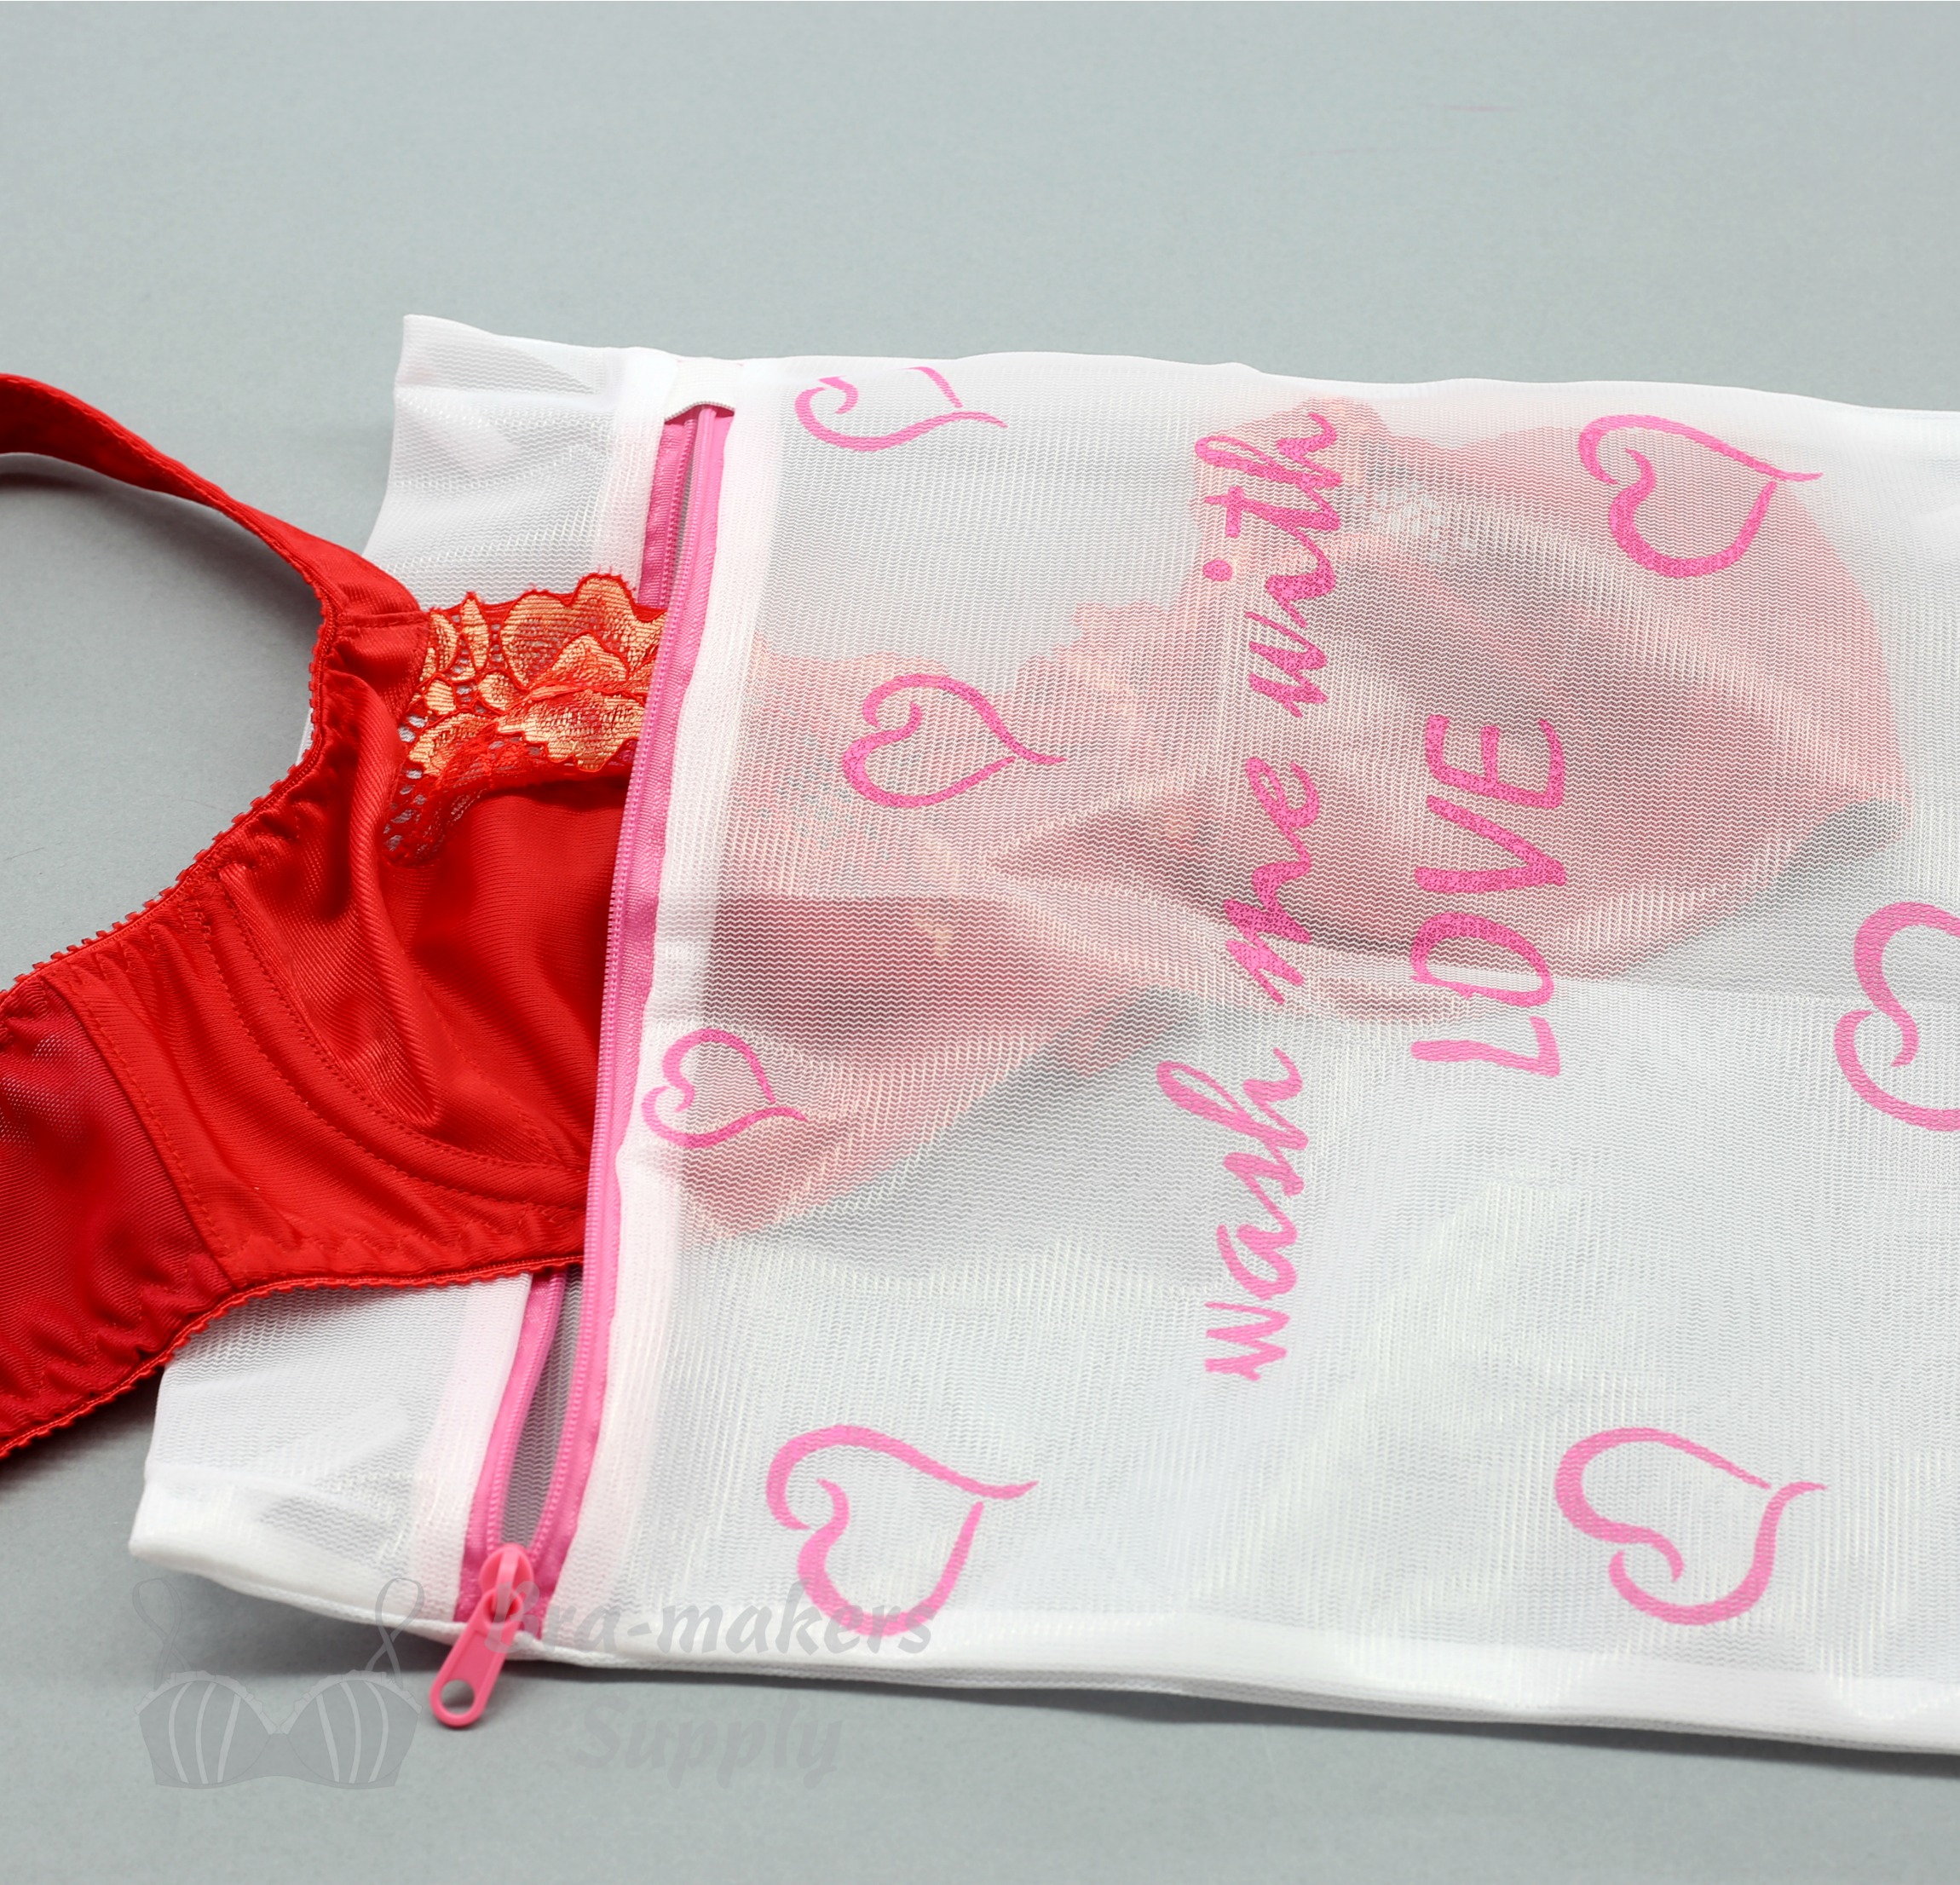 Lingerie Laundry Bag - perfect size for washing all your delicates by hand  or machine